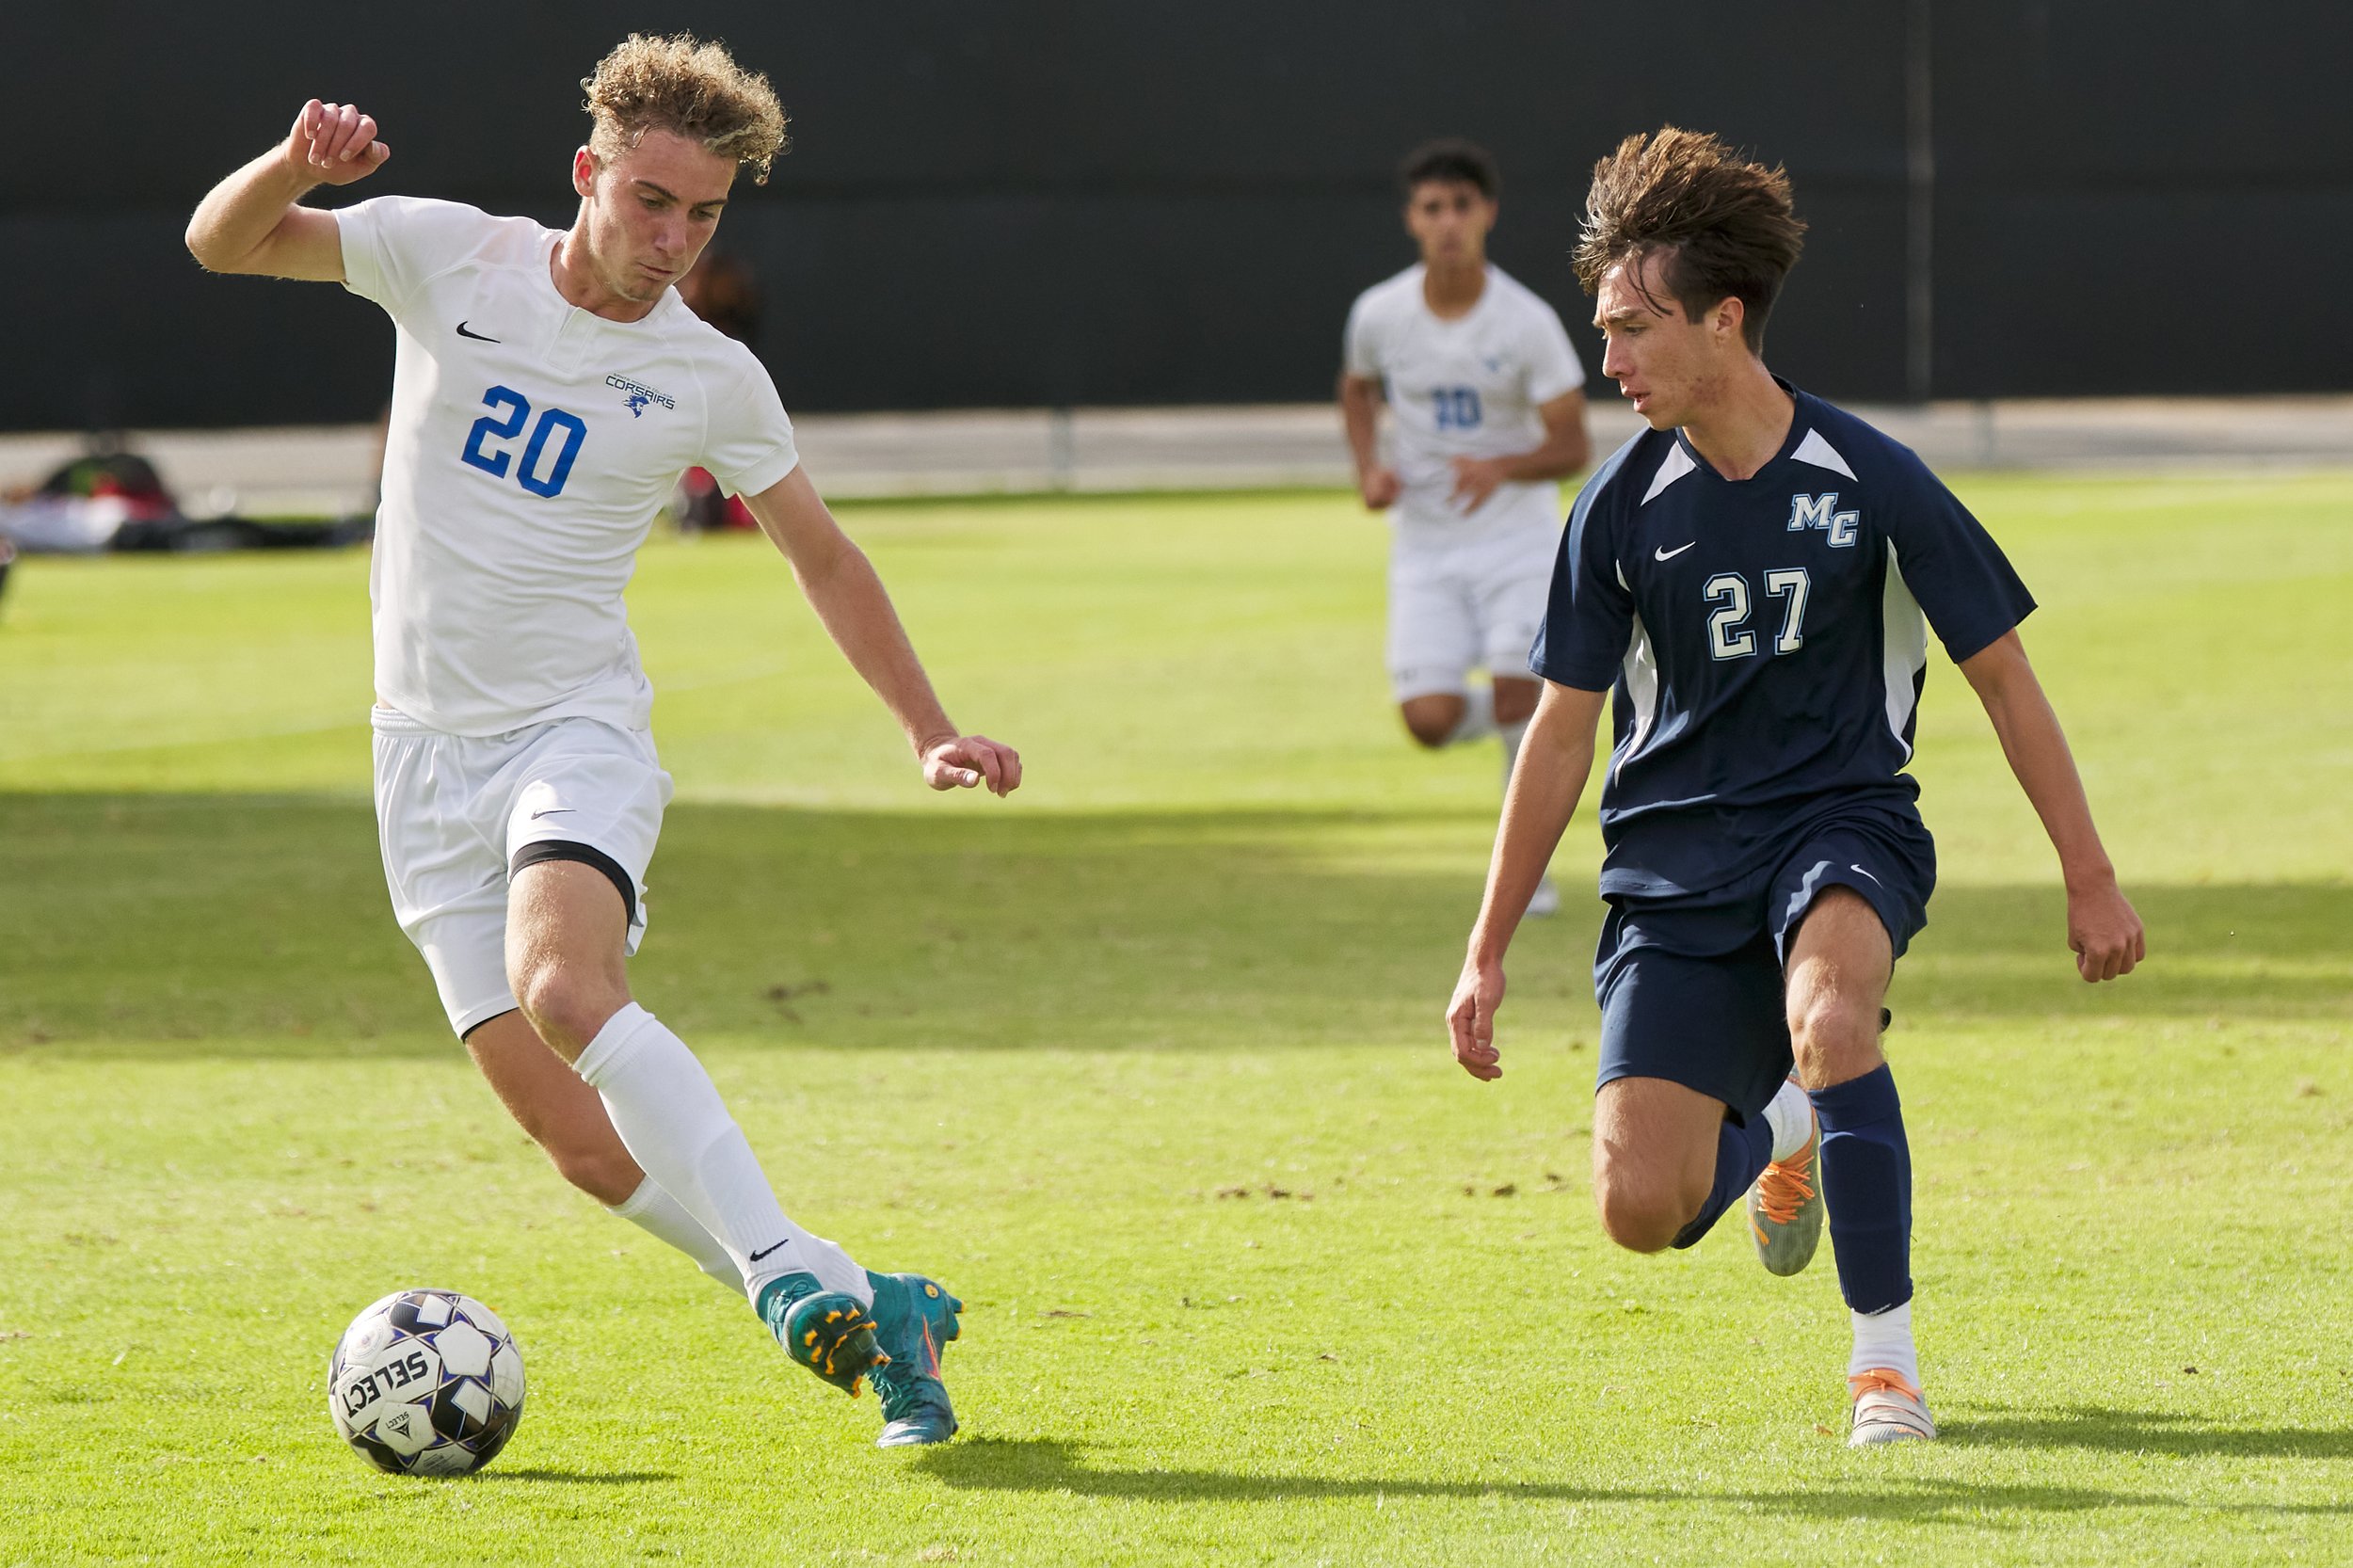  Santa Monica College Corsairs' Marcus Hevesy-Rodriguez and Moorpark College Raiders' Cytres Vives during the men's soccer match on Friday, Nov. 11, 2022, at Field Hockey Stadium in Moorpark, Calif. The Corsairs won 2-1. (Nicholas McCall | The Corsai